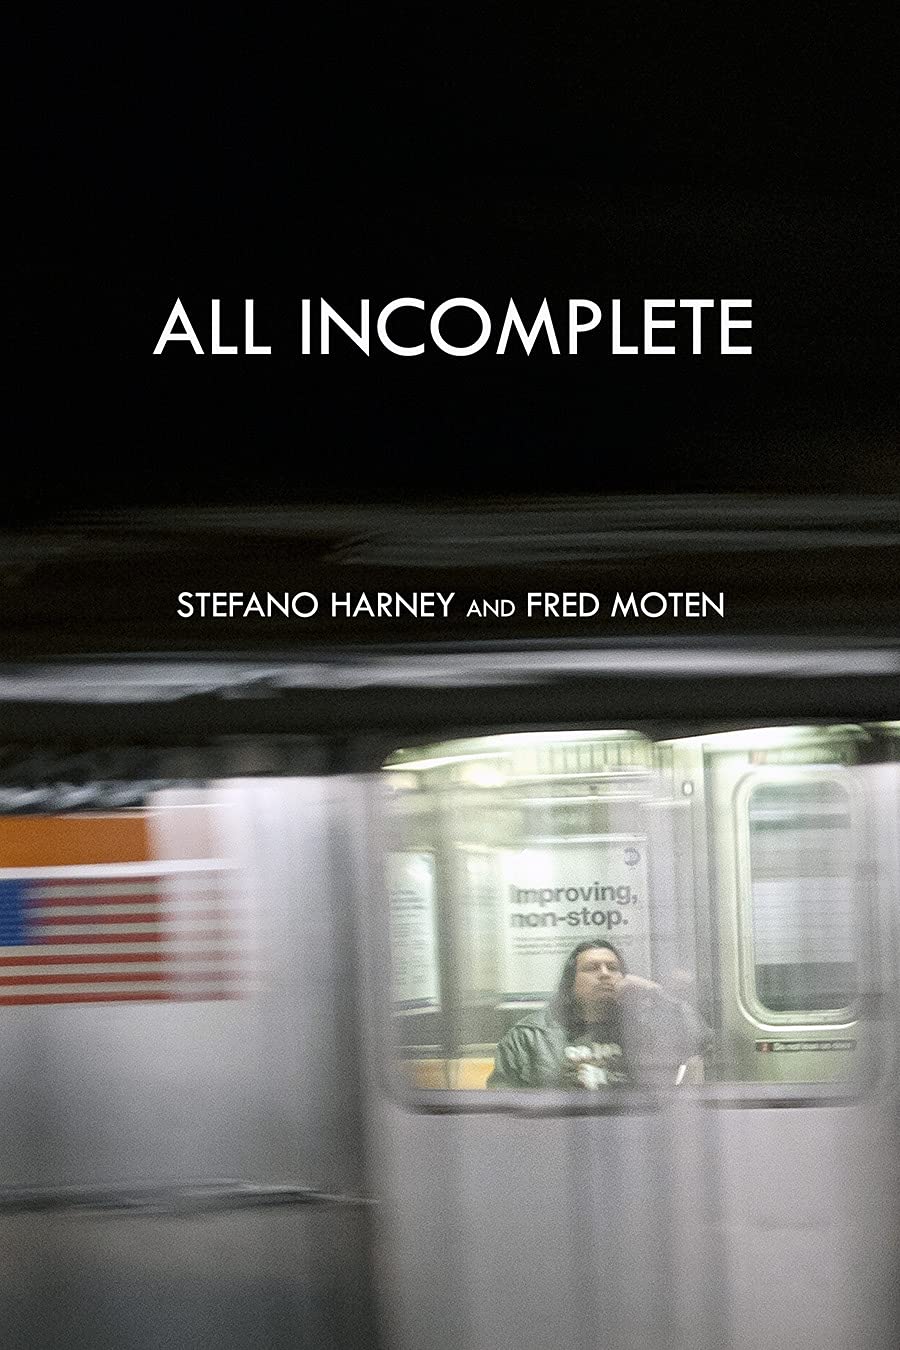 All Incomplete by Stefano Harney, Fred Moten